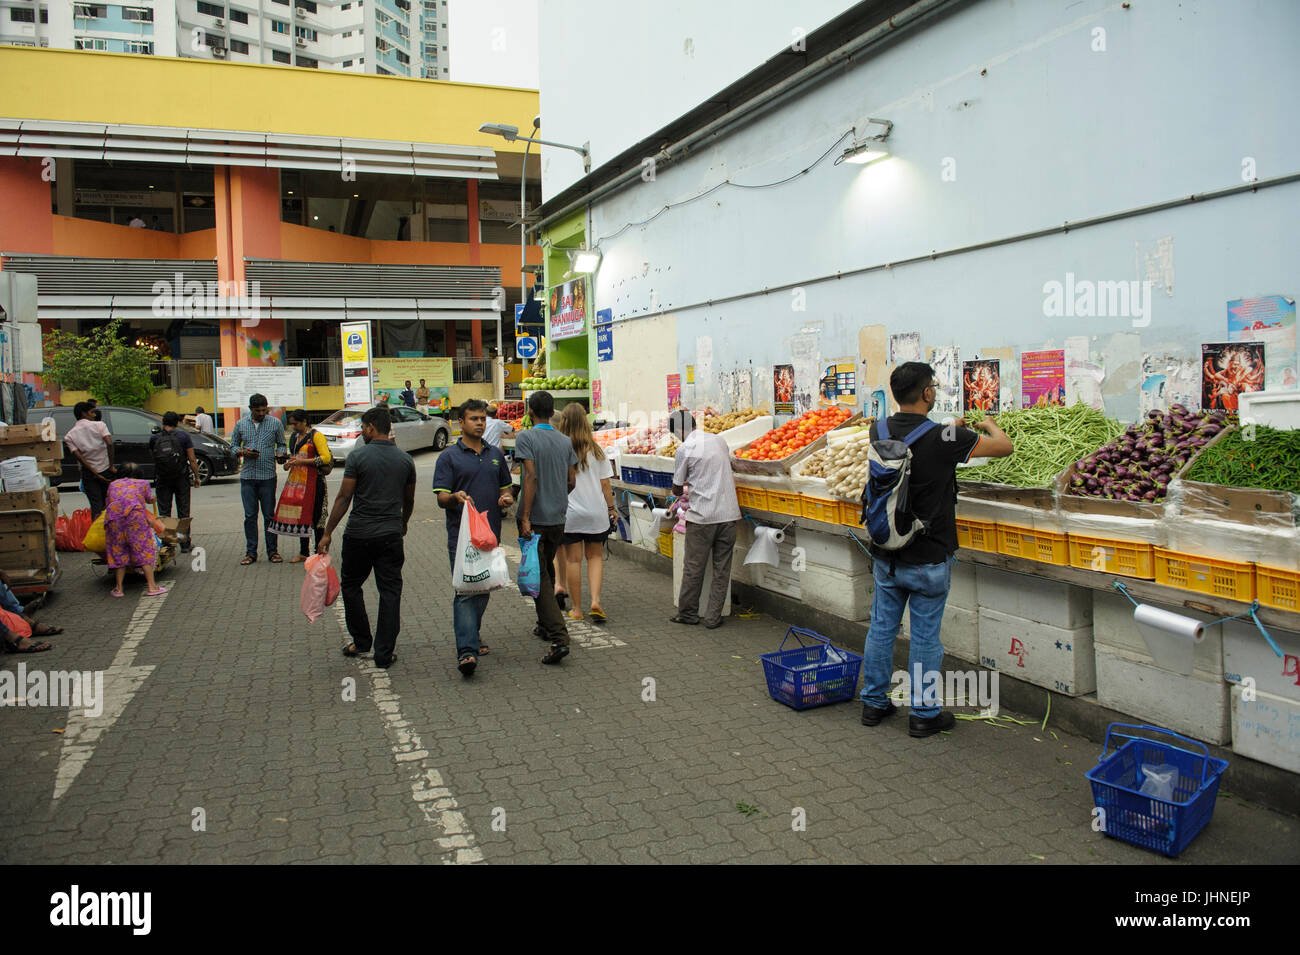 Street stalls selling a range of fresh fruit and vegetables, Little India, Singapore Stock Photo